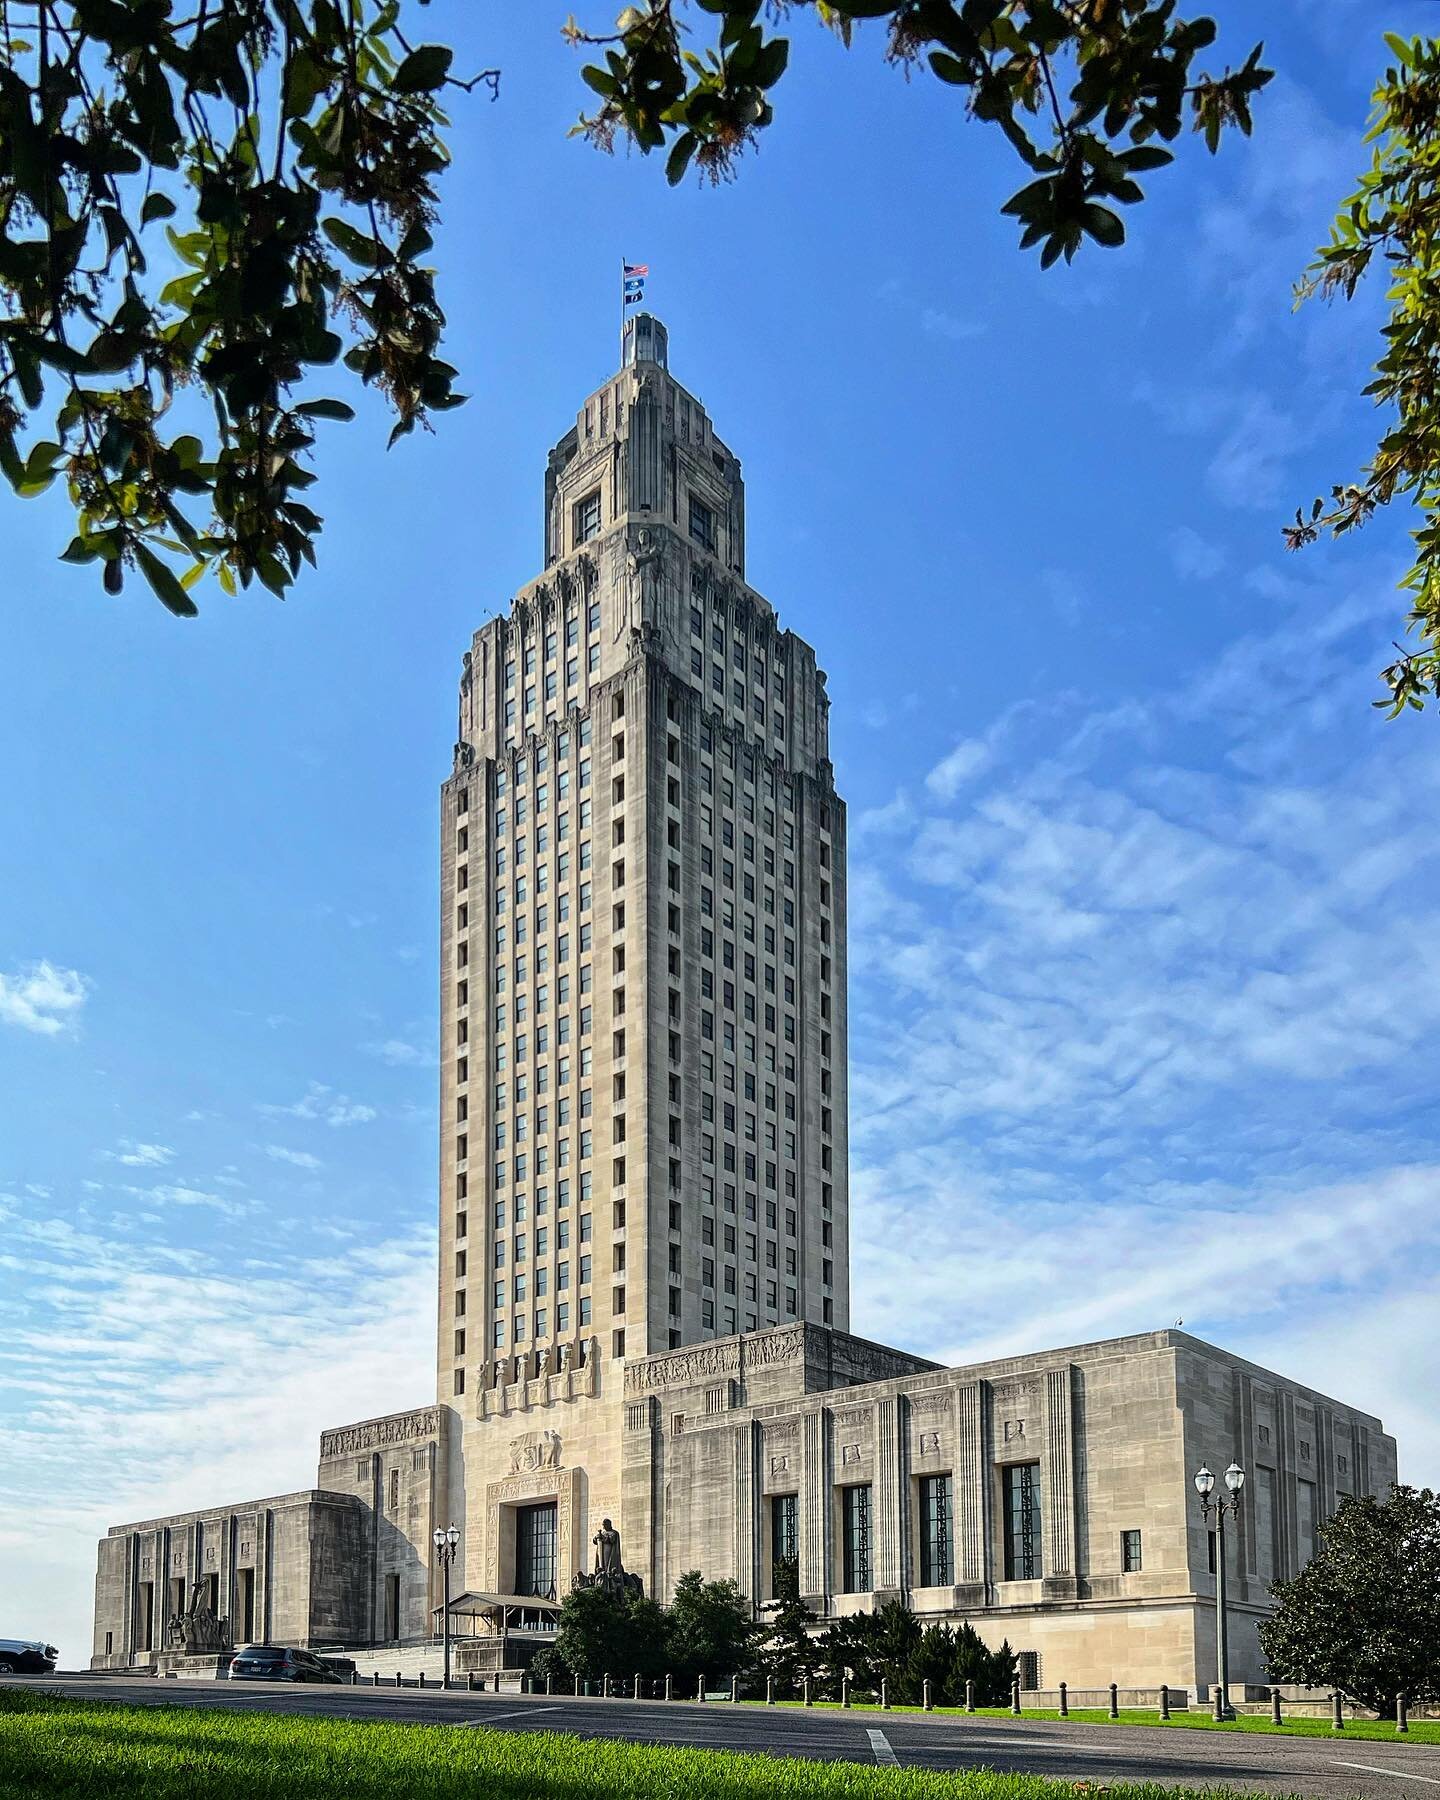 Louisiana Capitol, built 1932. Architect Leon C. Weiss. 

At 450 feet (137 m) tall and with 34 stories, it is the tallest skyscraper in Baton Rouge, the seventh tallest building in Louisiana, and tallest capitol in the United States.